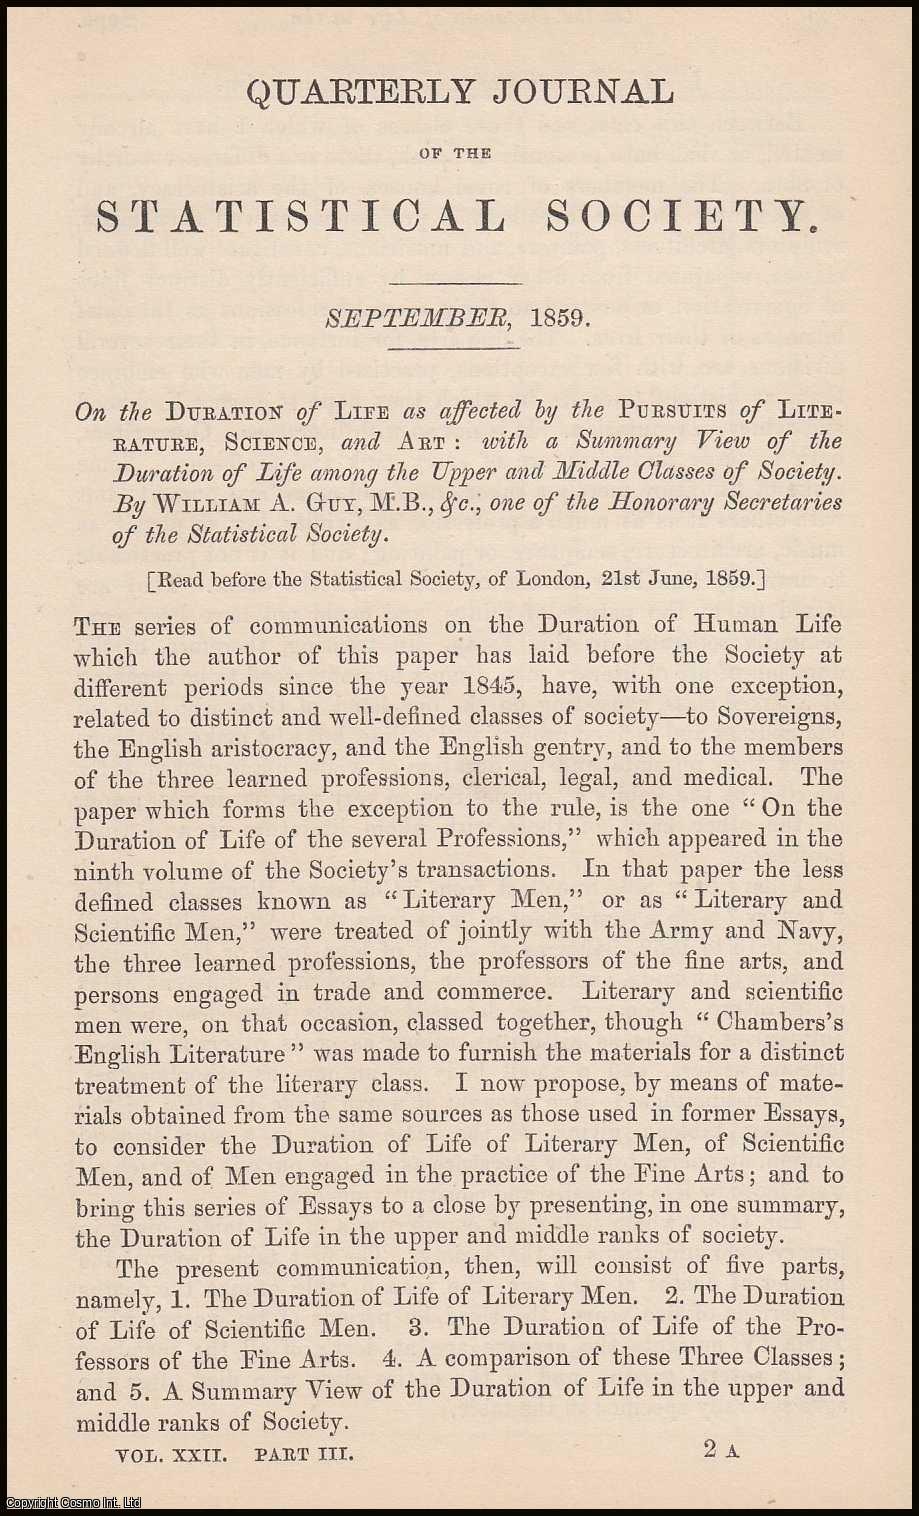 Guy, William A. - On the Duration of Life as affected by the Pursuits of Literature, Science, and Art: with a Summary View of the Duration of Life among the Upper and Middle Classes of Society. A rare original article from the Journal of the Royal Statistical Society of London, 1859.